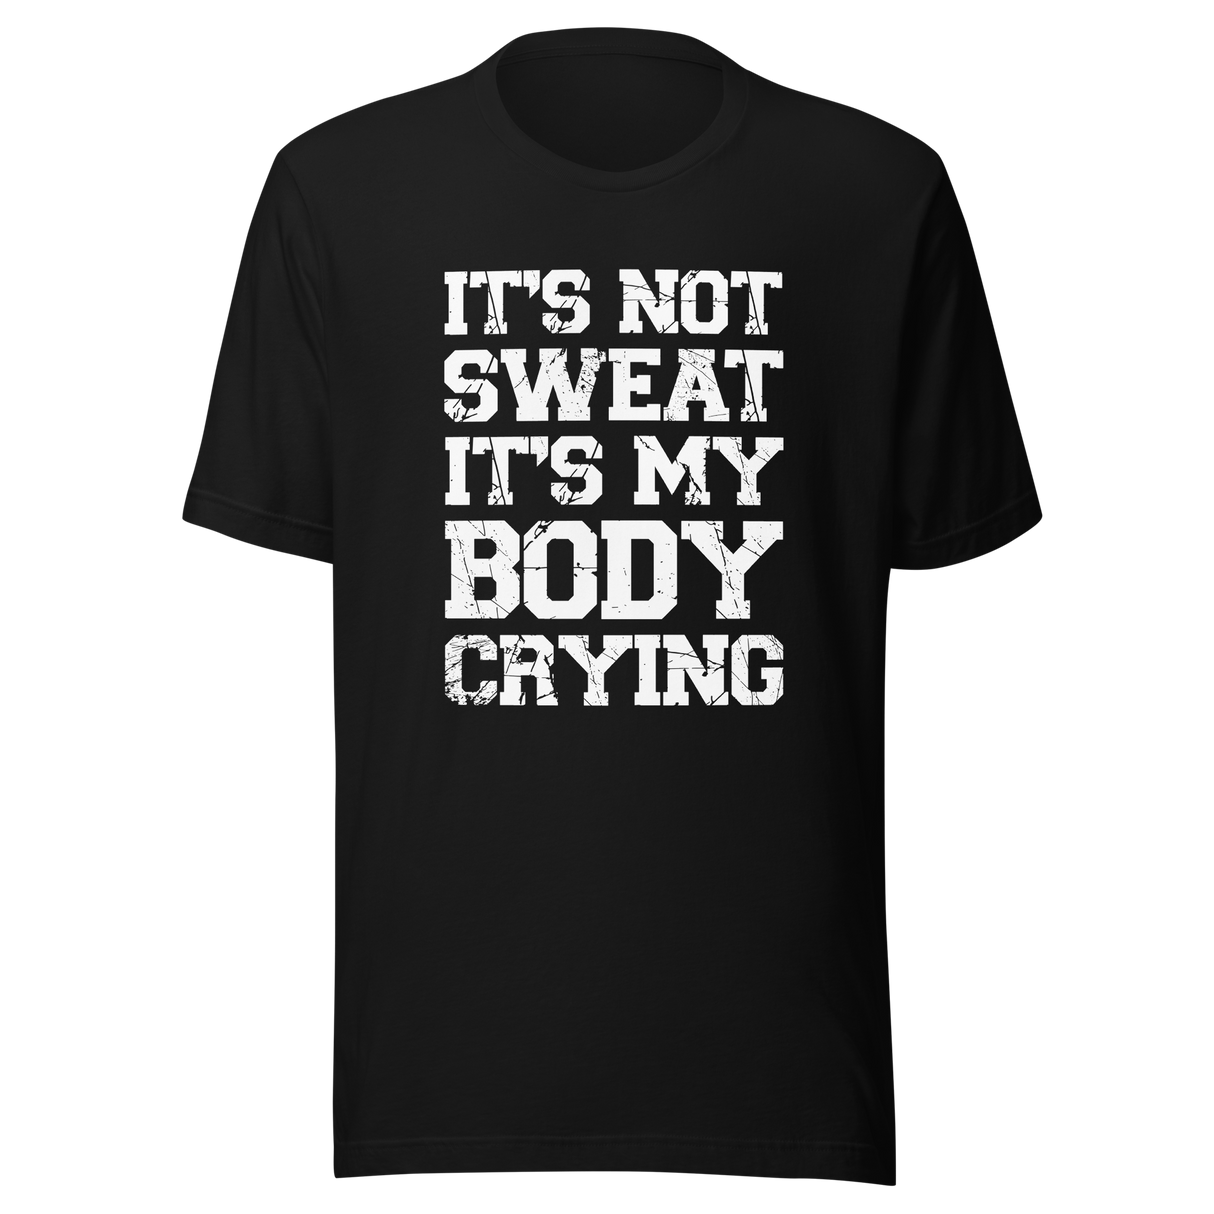 its-not-sweat-its-my-body-crying-gym-tee-awesome-t-shirt-workout-tee-fitness-t-shirt-truth-tee#color_black